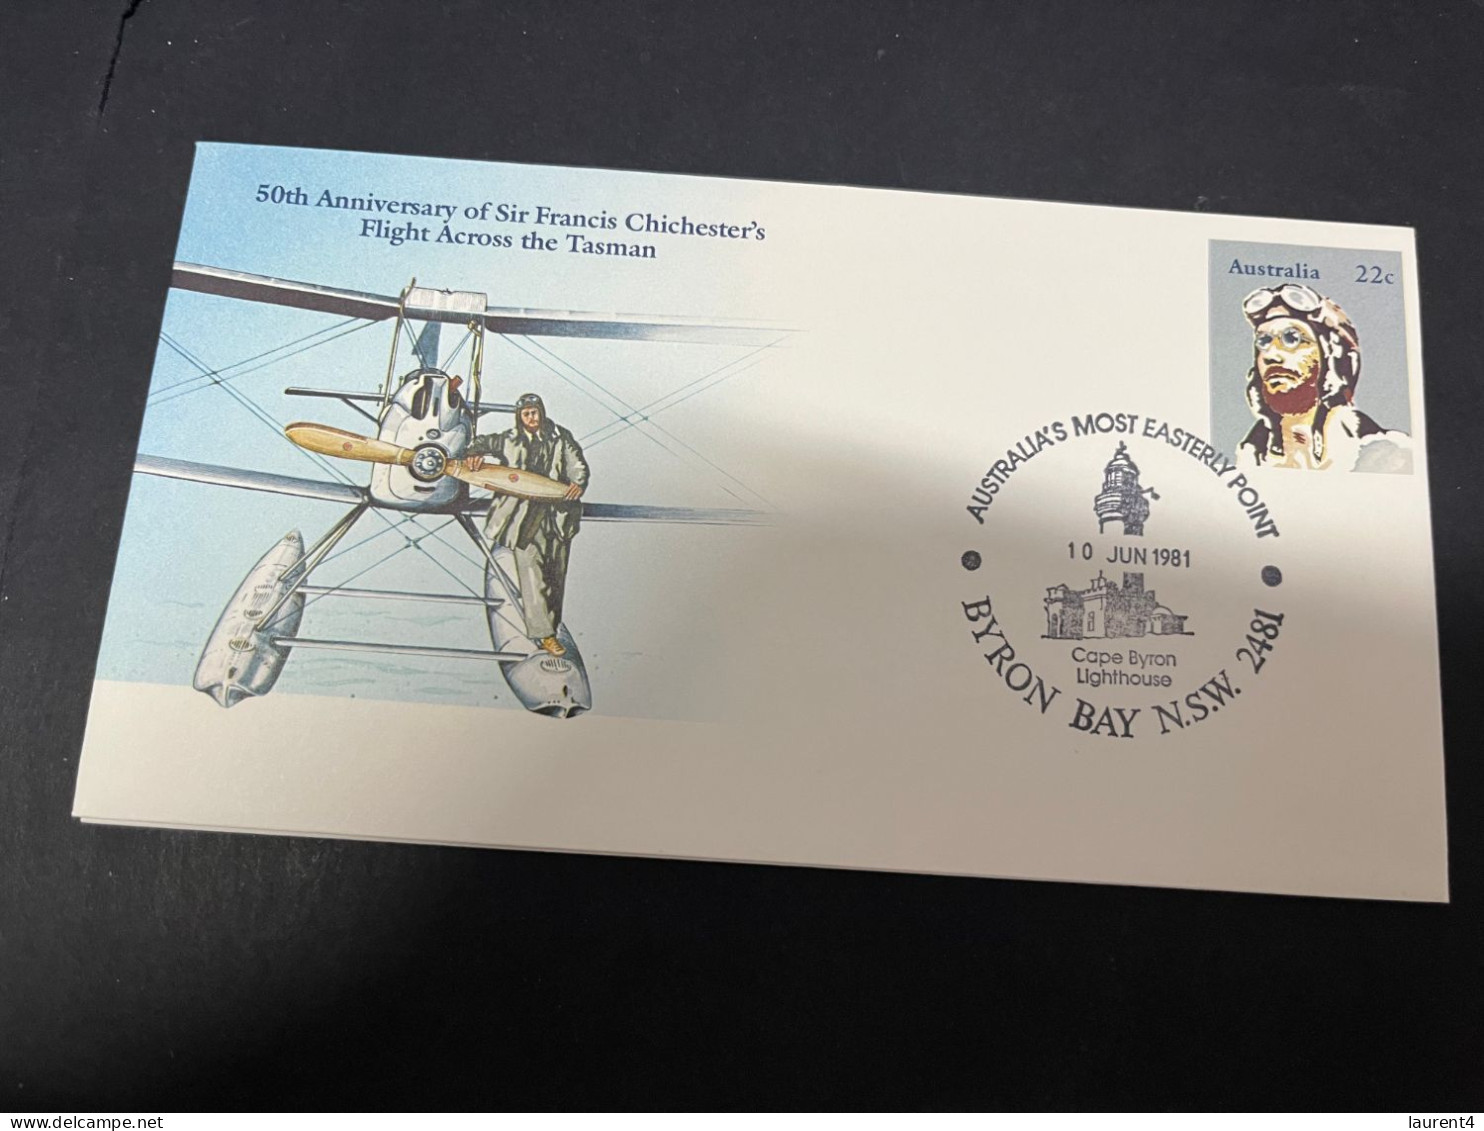 30-4-2023 (3 Z 29) Australia FDC (1 Cover) 1981 - 50th Anniversary Francis Chichesters (Byon Bay Lighthouse P/m) - Premiers Jours (FDC)